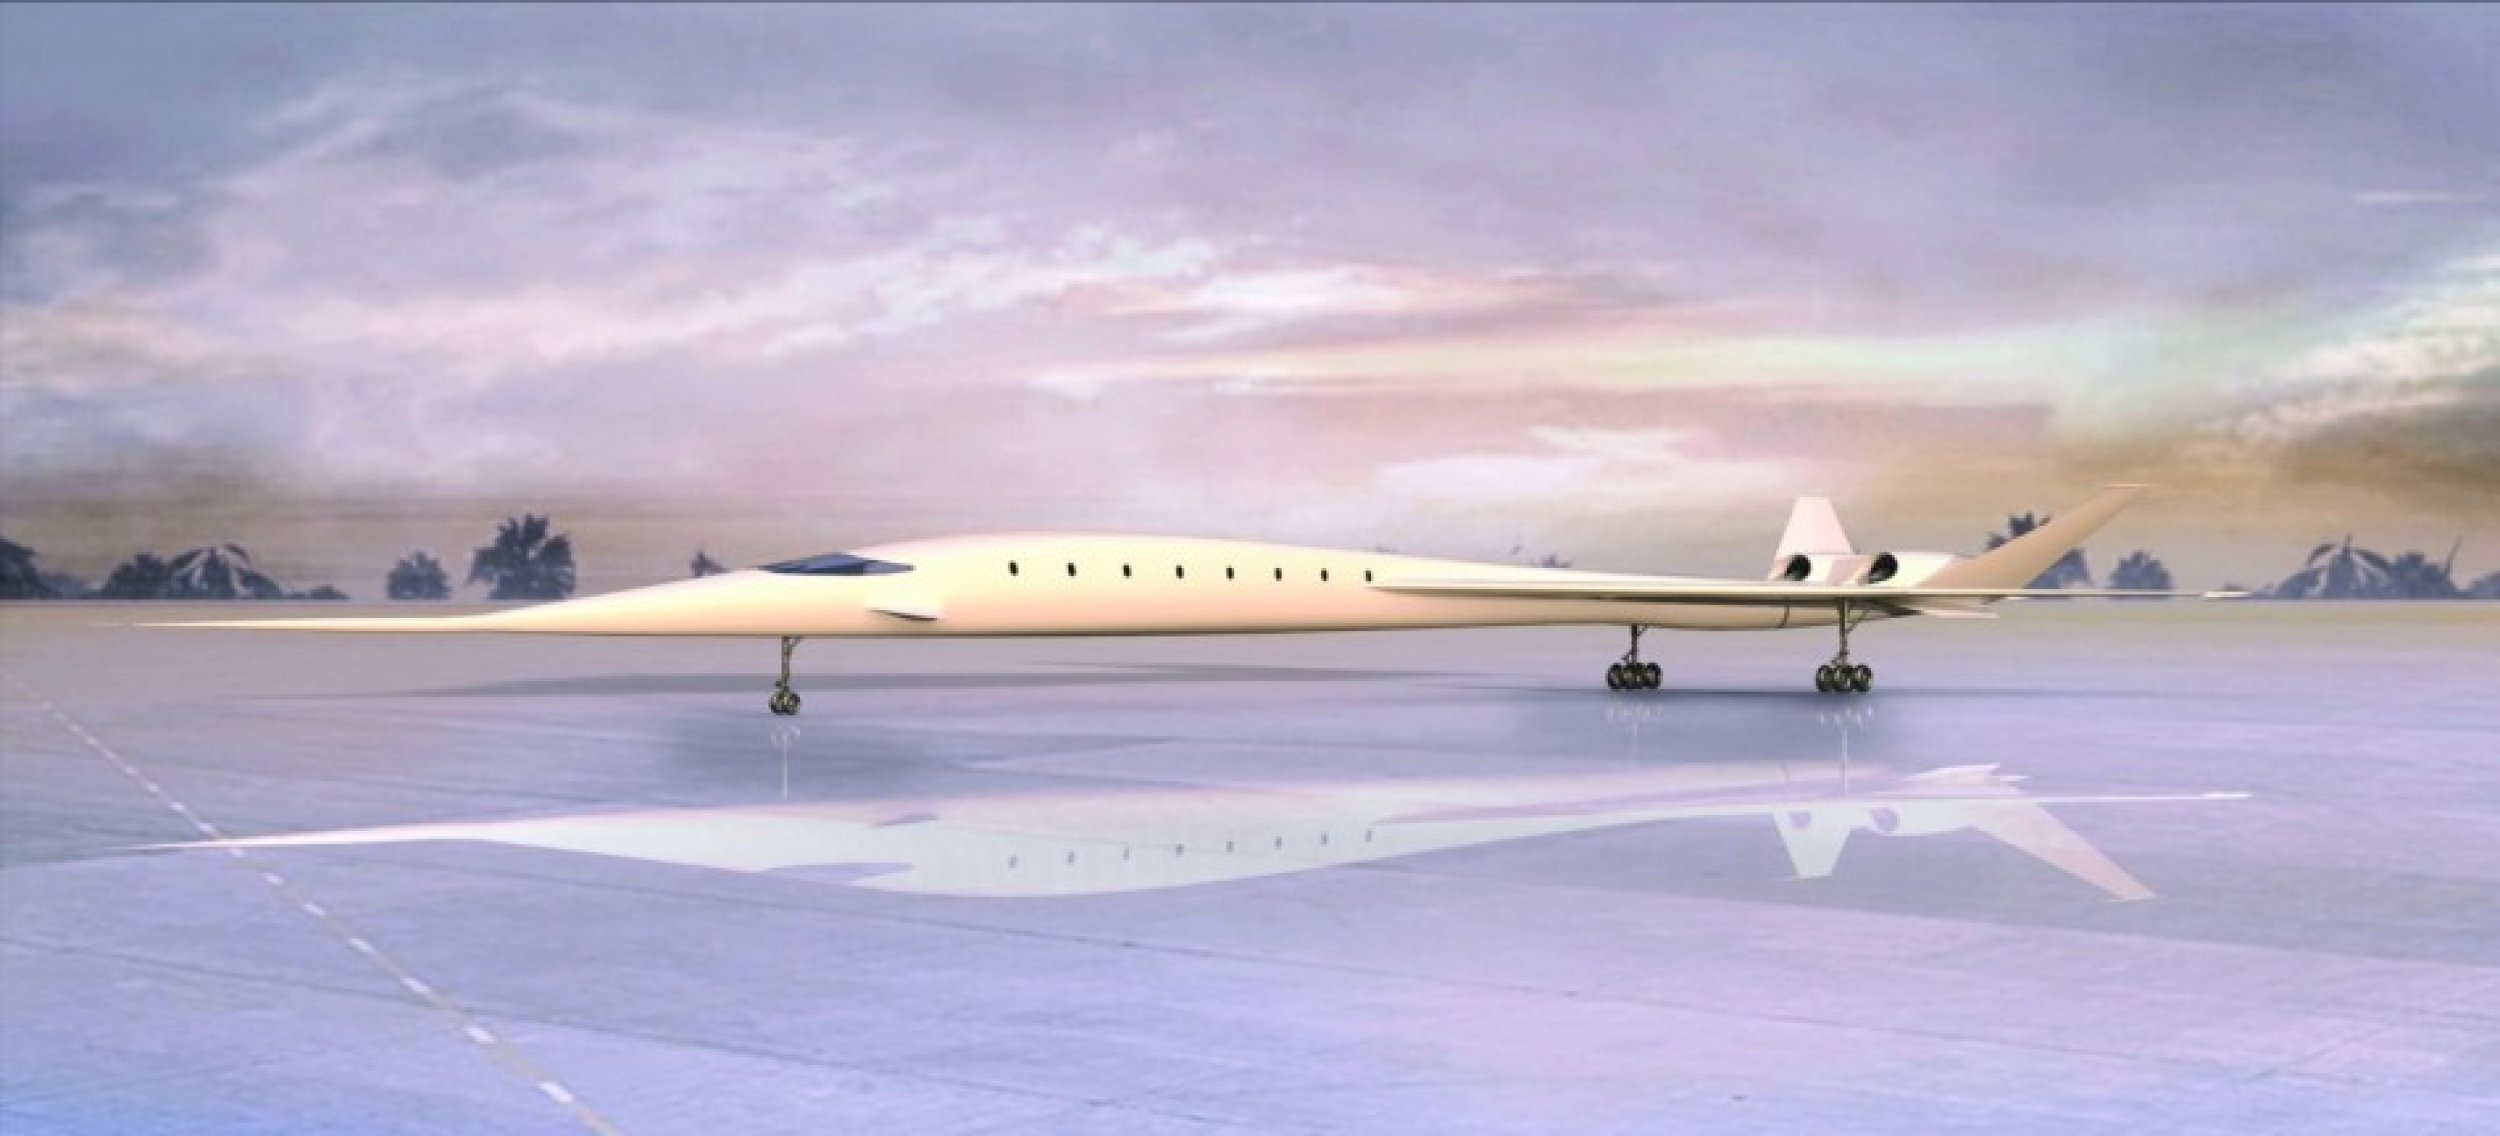 New York to Sydney in five hours Supersonic jet to revolutionize air travel.